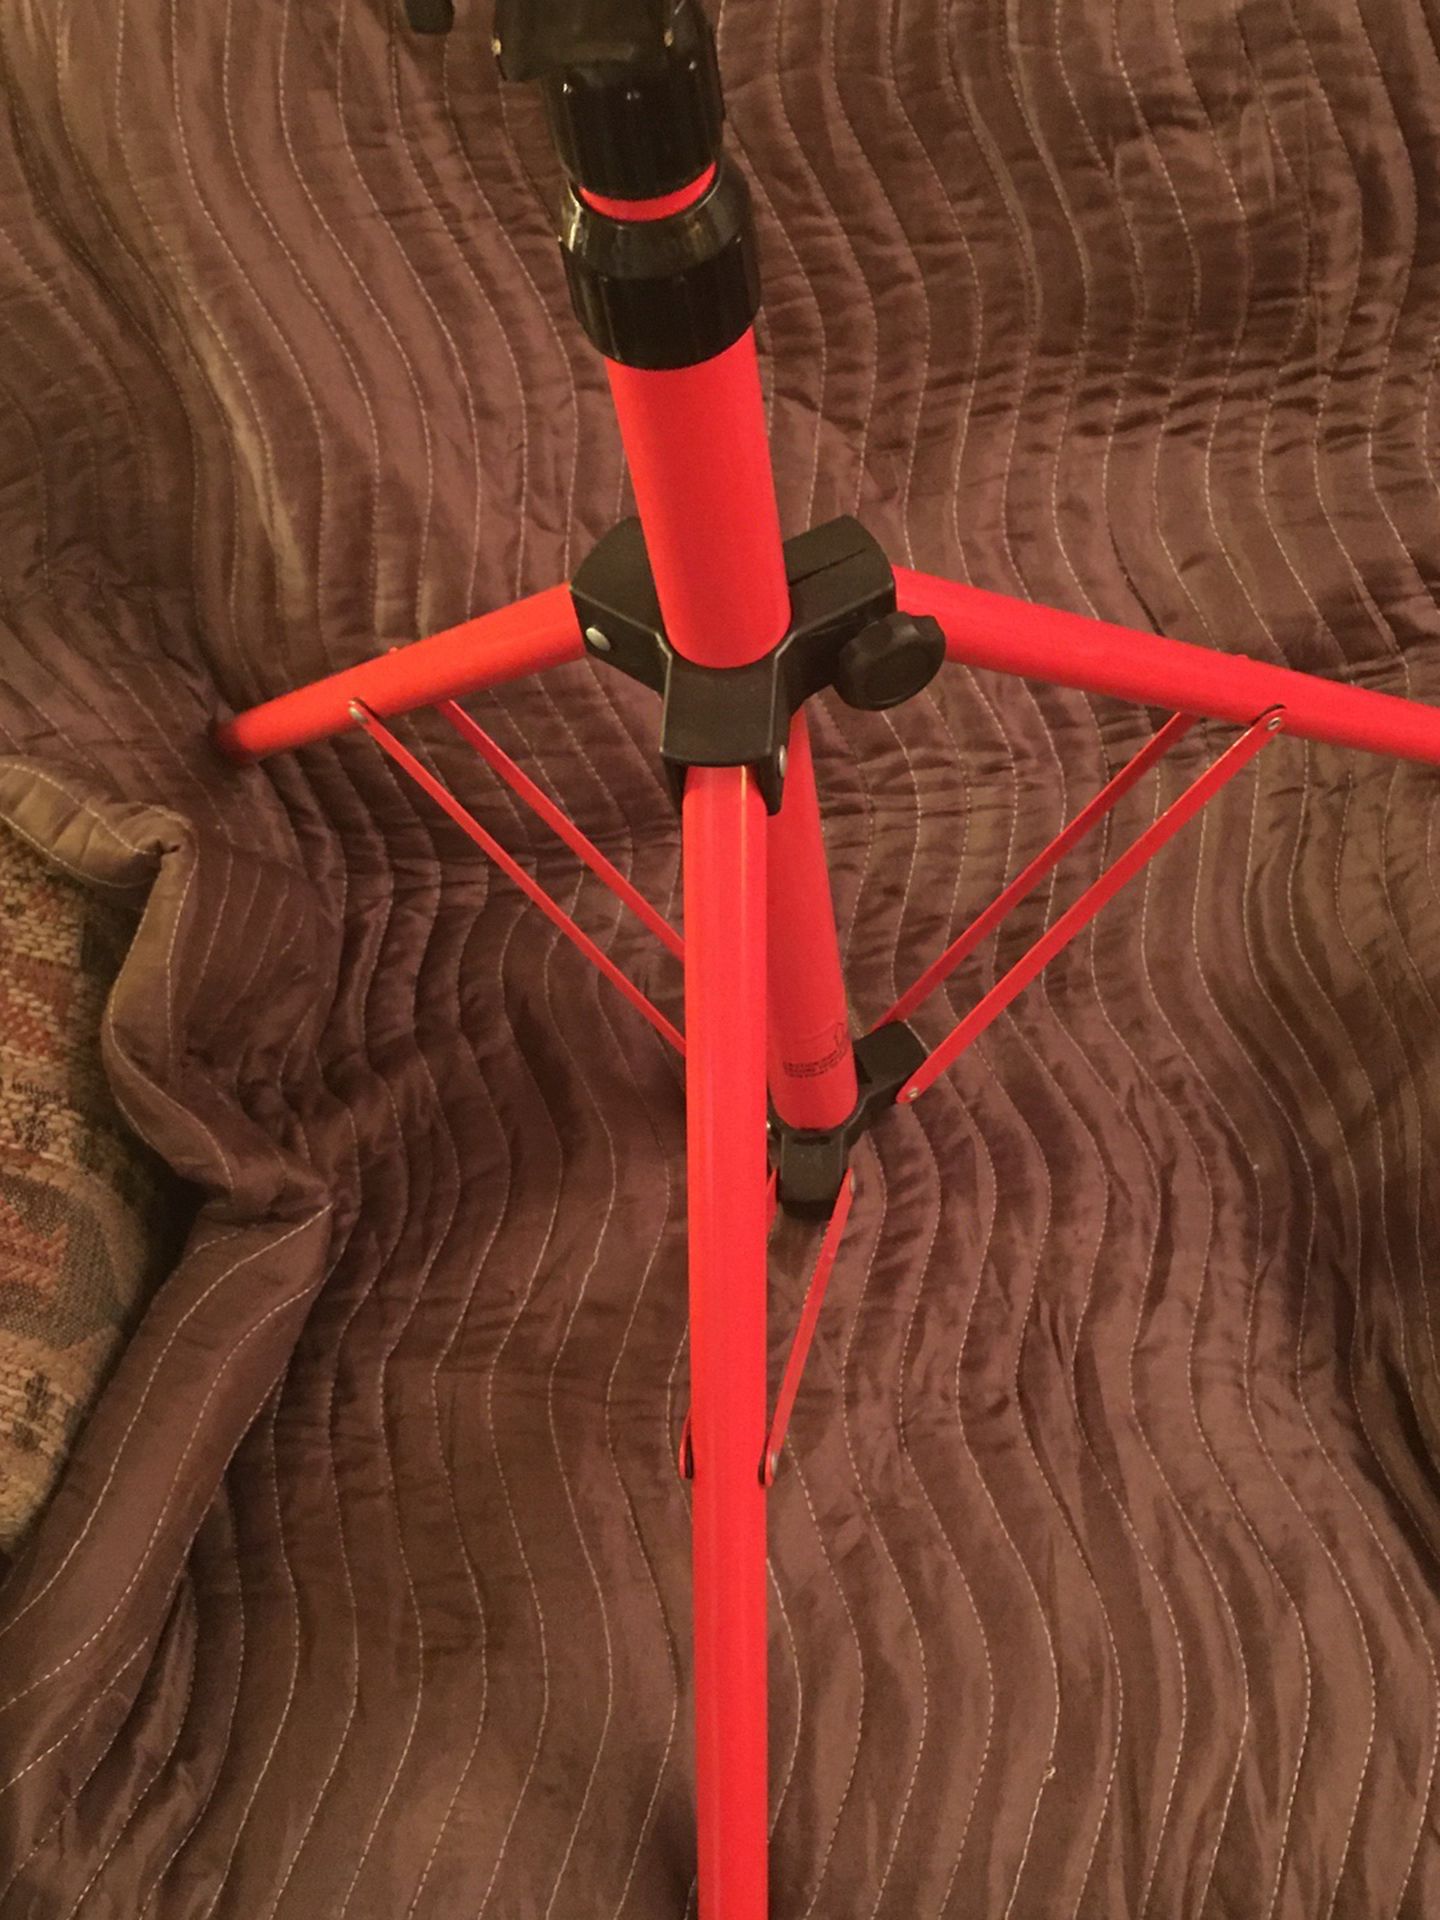 Brand New Never Used 60” INCH ADJUSTABLE TRIPOD $20.00